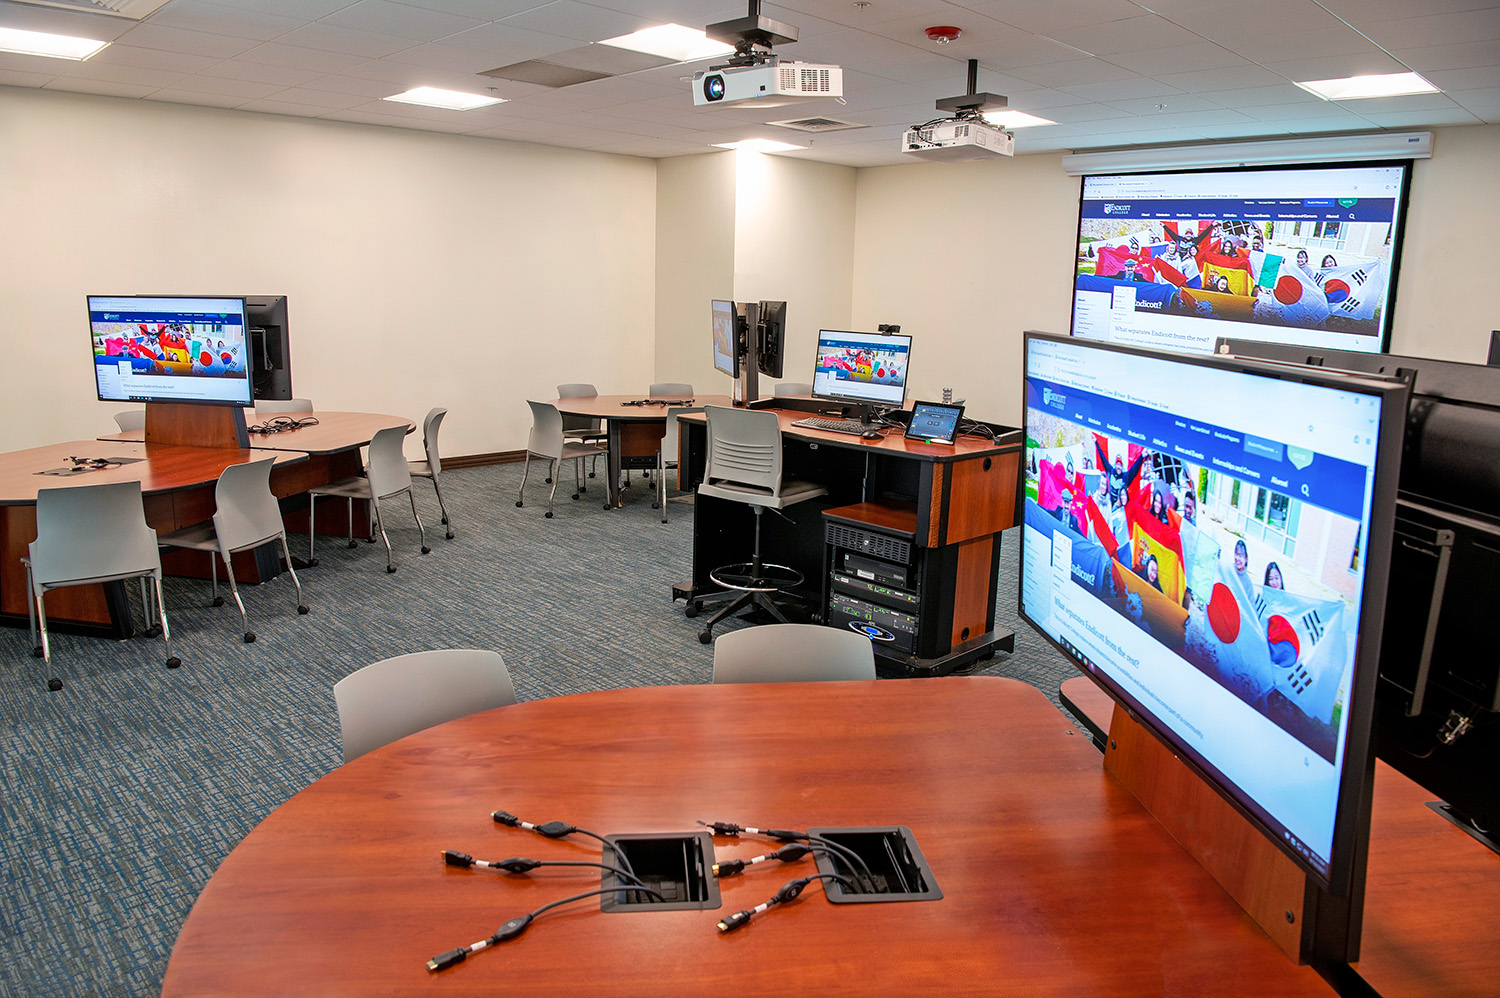 Endicott College chose the Team Building active learning classroom for the proof-of-concept AV over IP design.